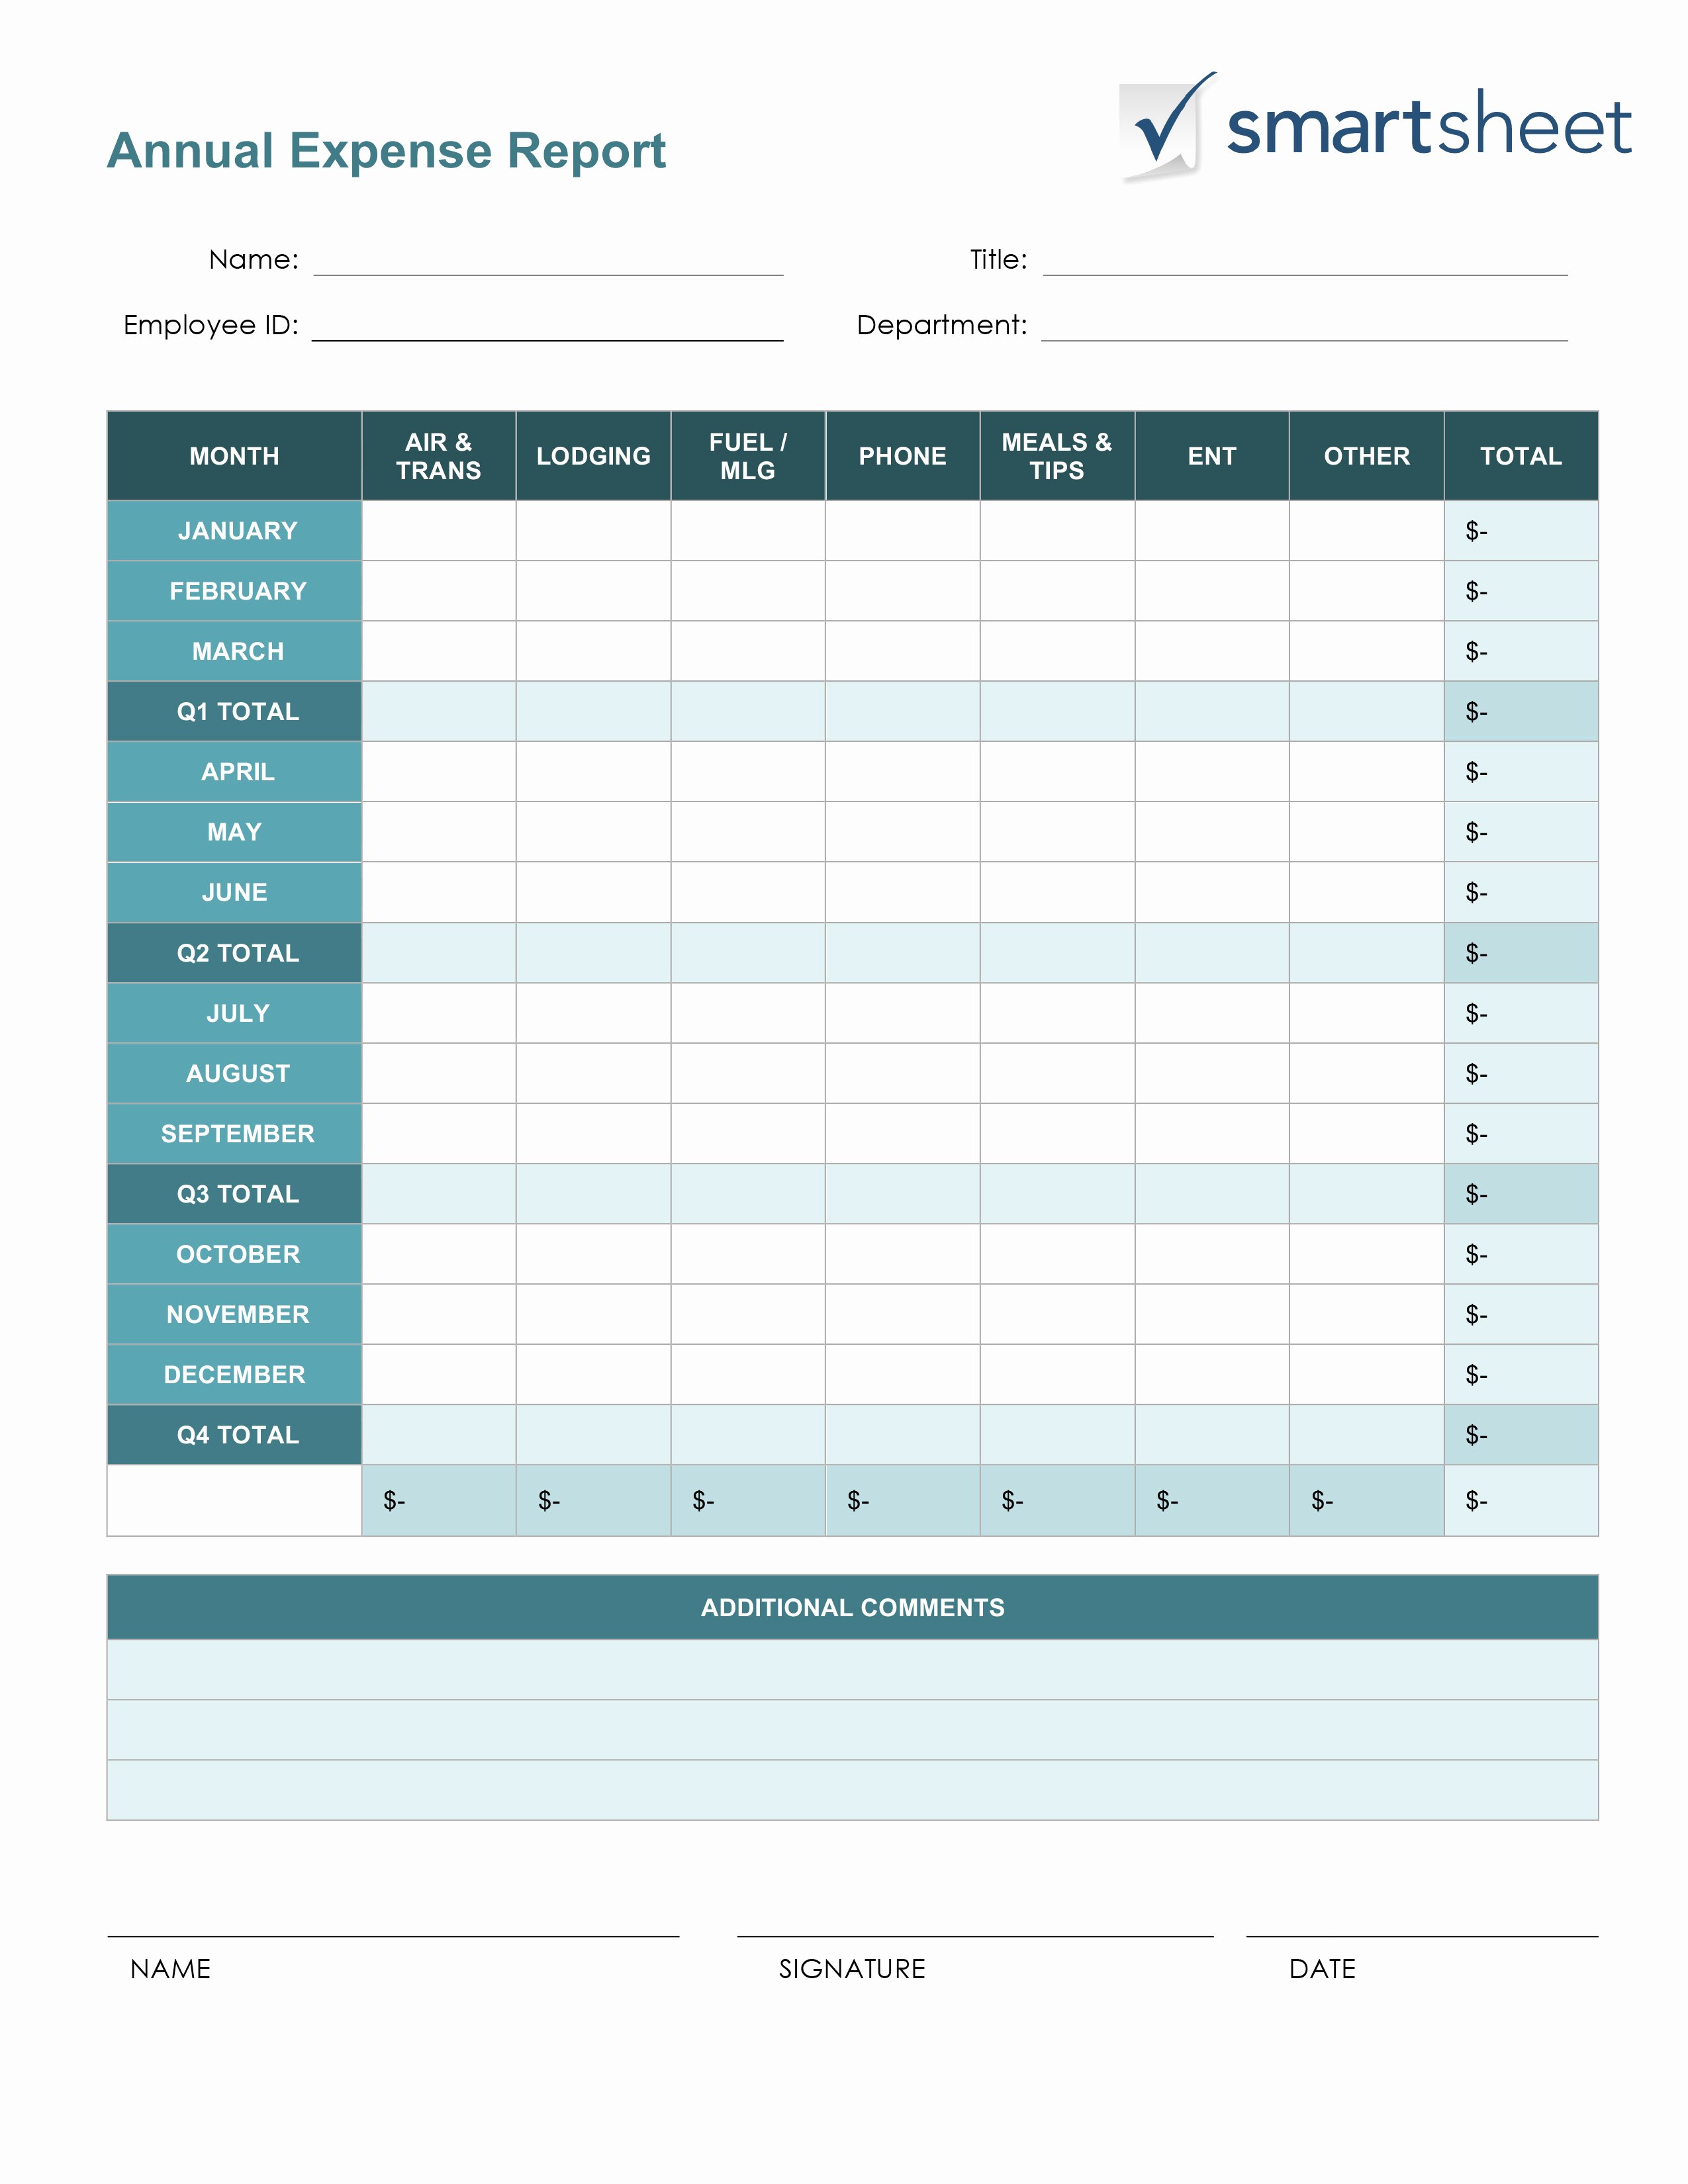 Monthly Expense Report Template Excel New Monthly Expense Report Template